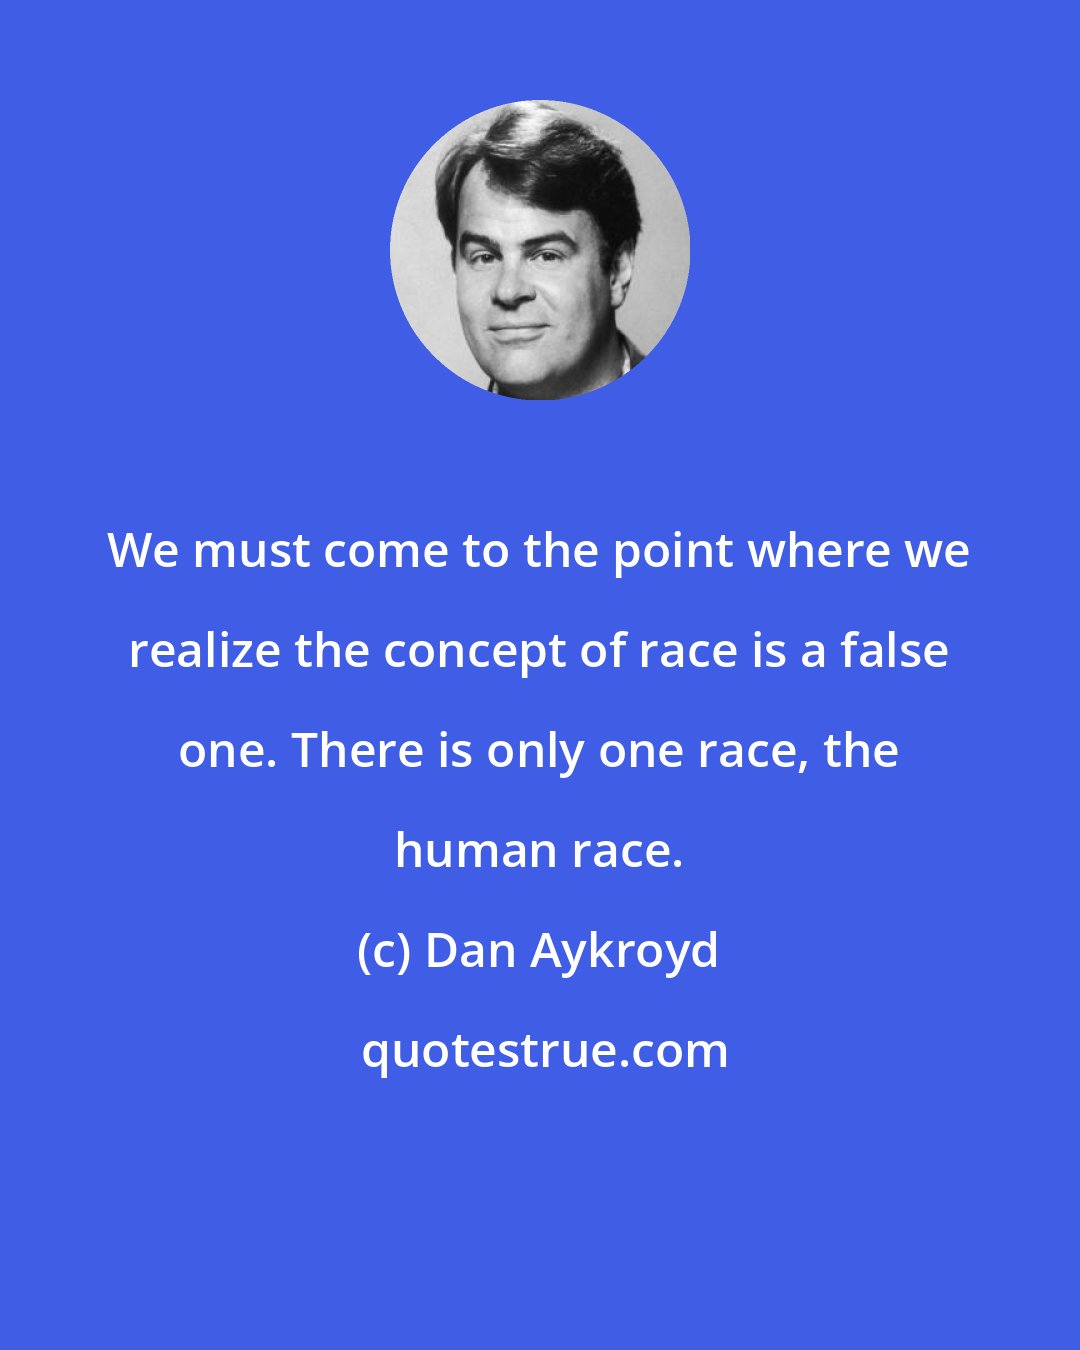 Dan Aykroyd: We must come to the point where we realize the concept of race is a false one. There is only one race, the human race.